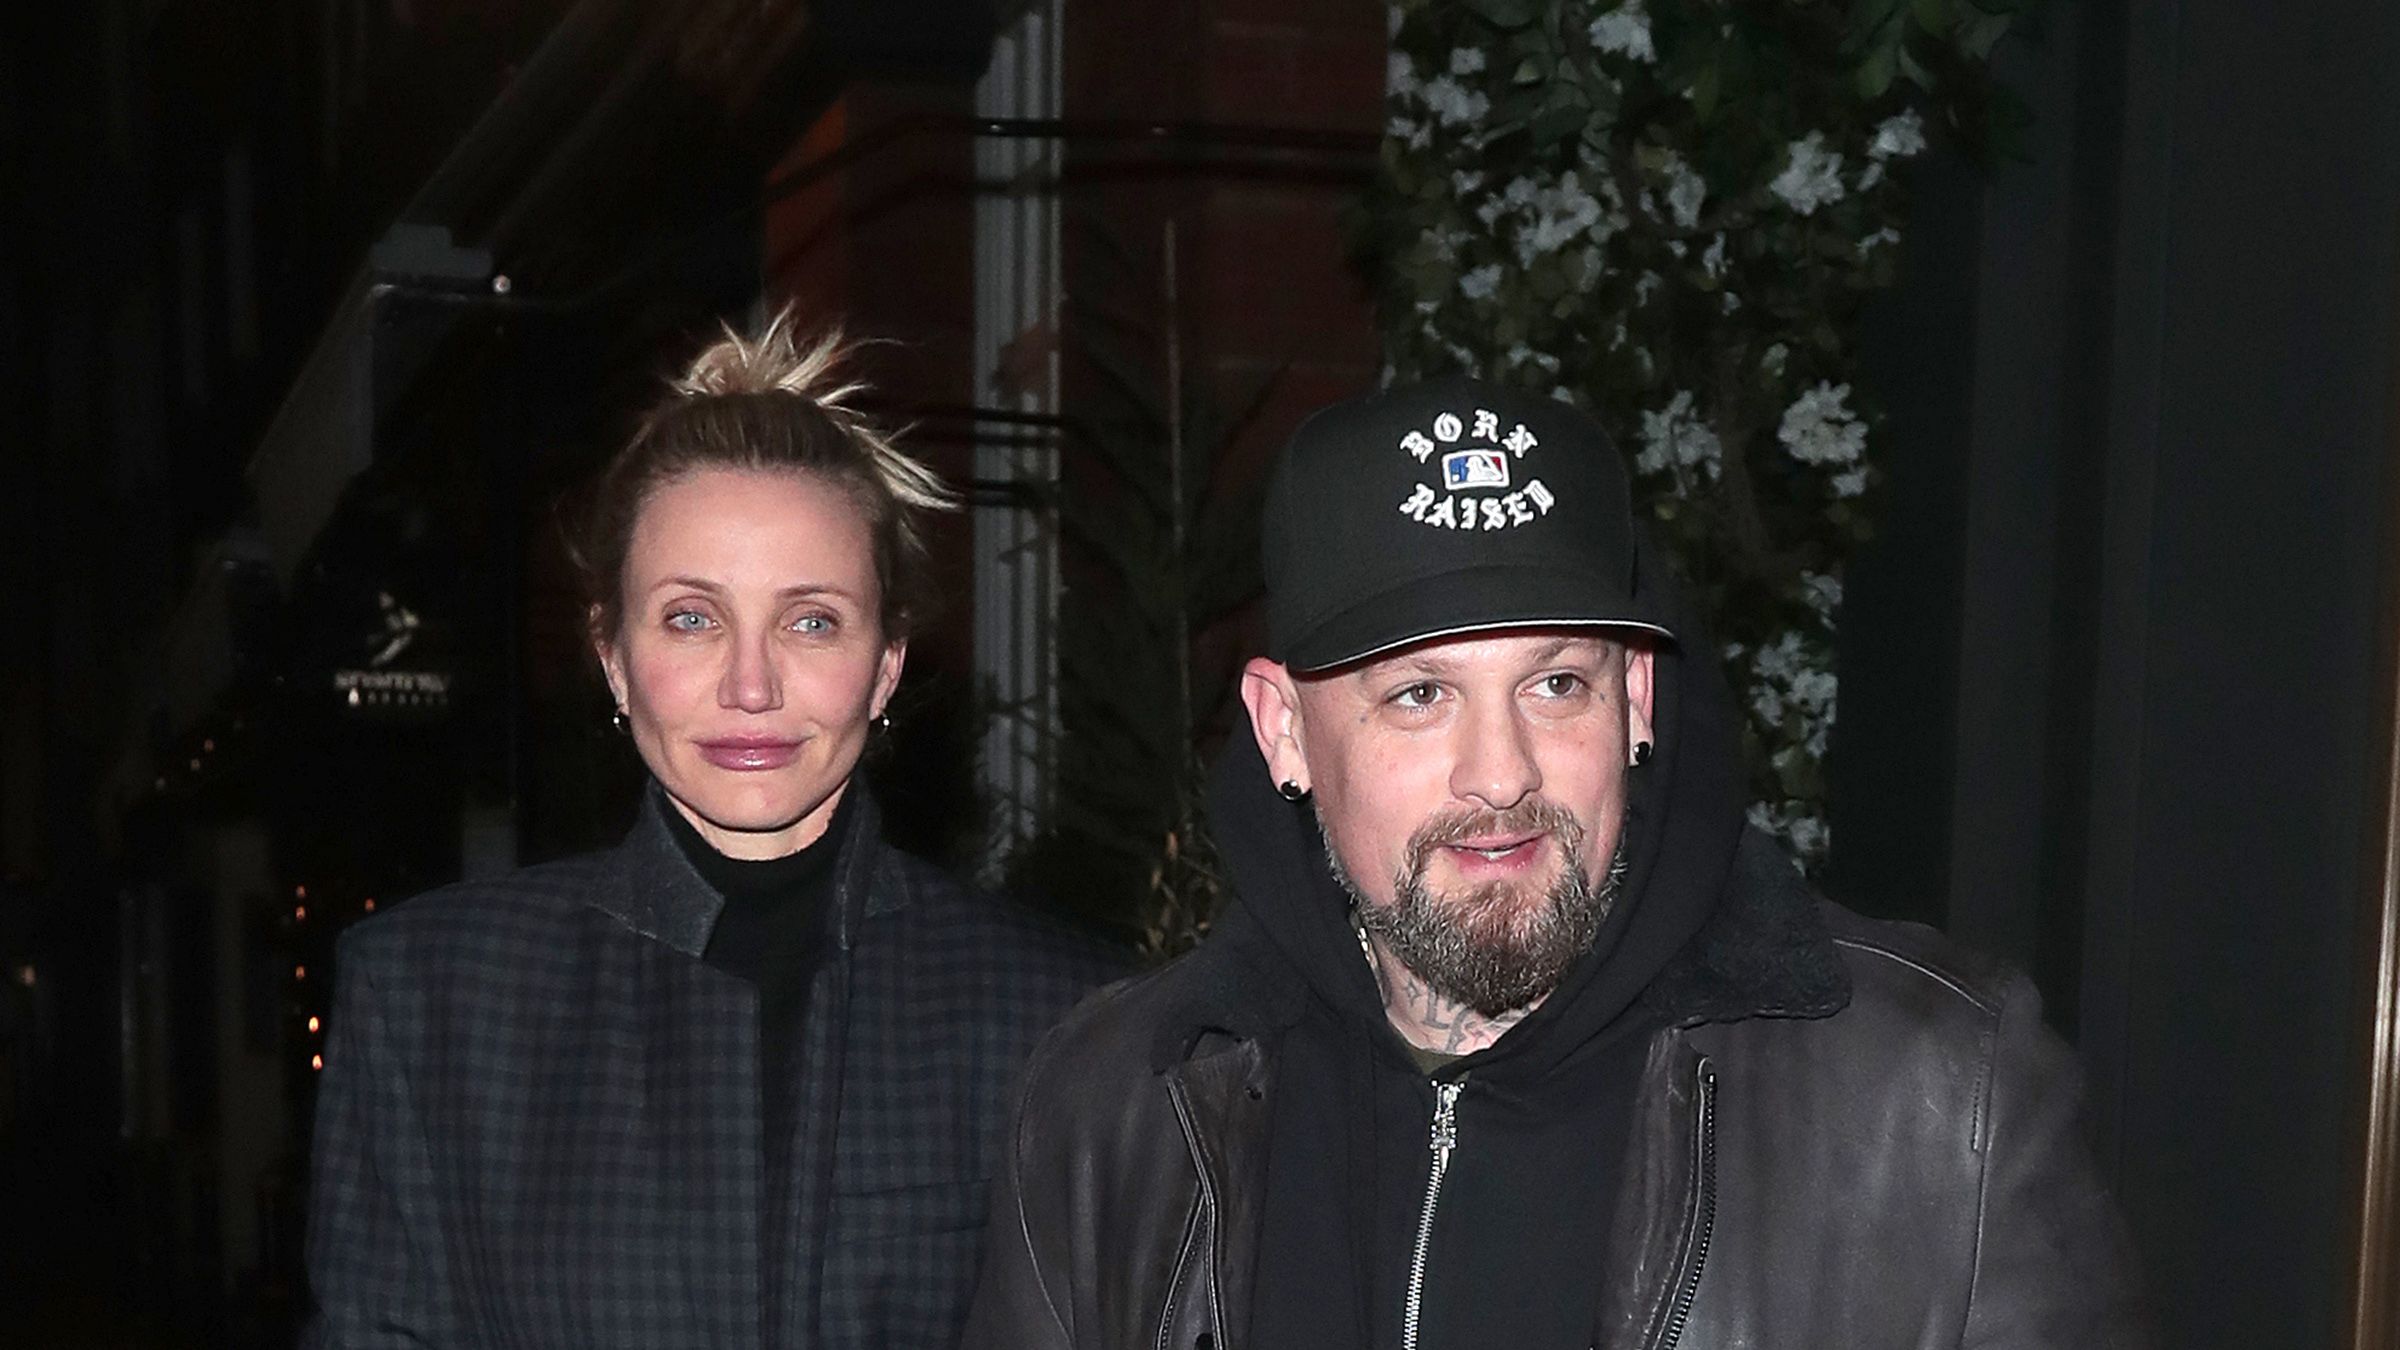 cameron-diaz-and-benji-madden-seen-on-a-night-out-at-news-photo-1711210149.jpg